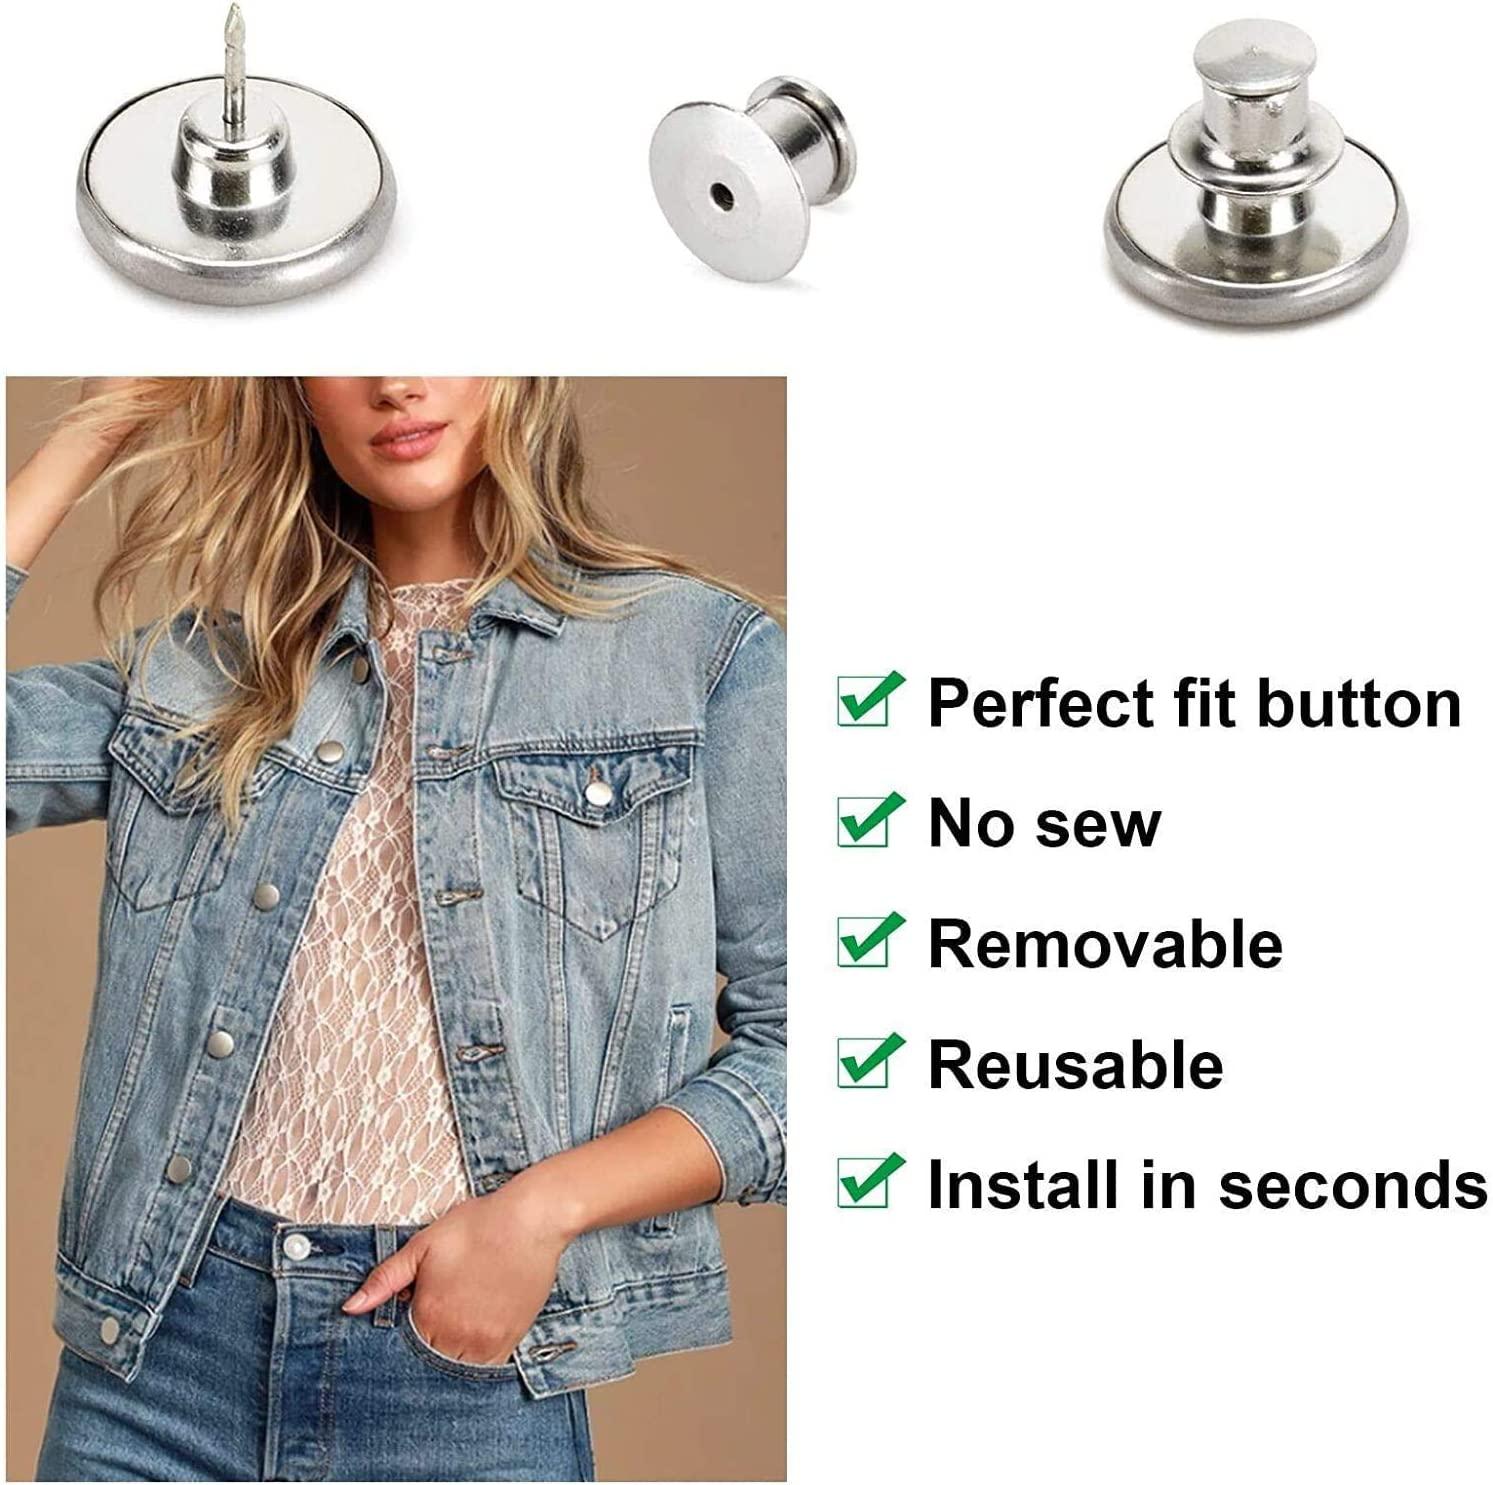 Jean Buttons Replacement No Sew Needed, 8 pcs Perfect Fit Instant Button to  Extend or Reduce 1 to Denim Pants Corduroy Skirt Skinny Jeans Jeggings